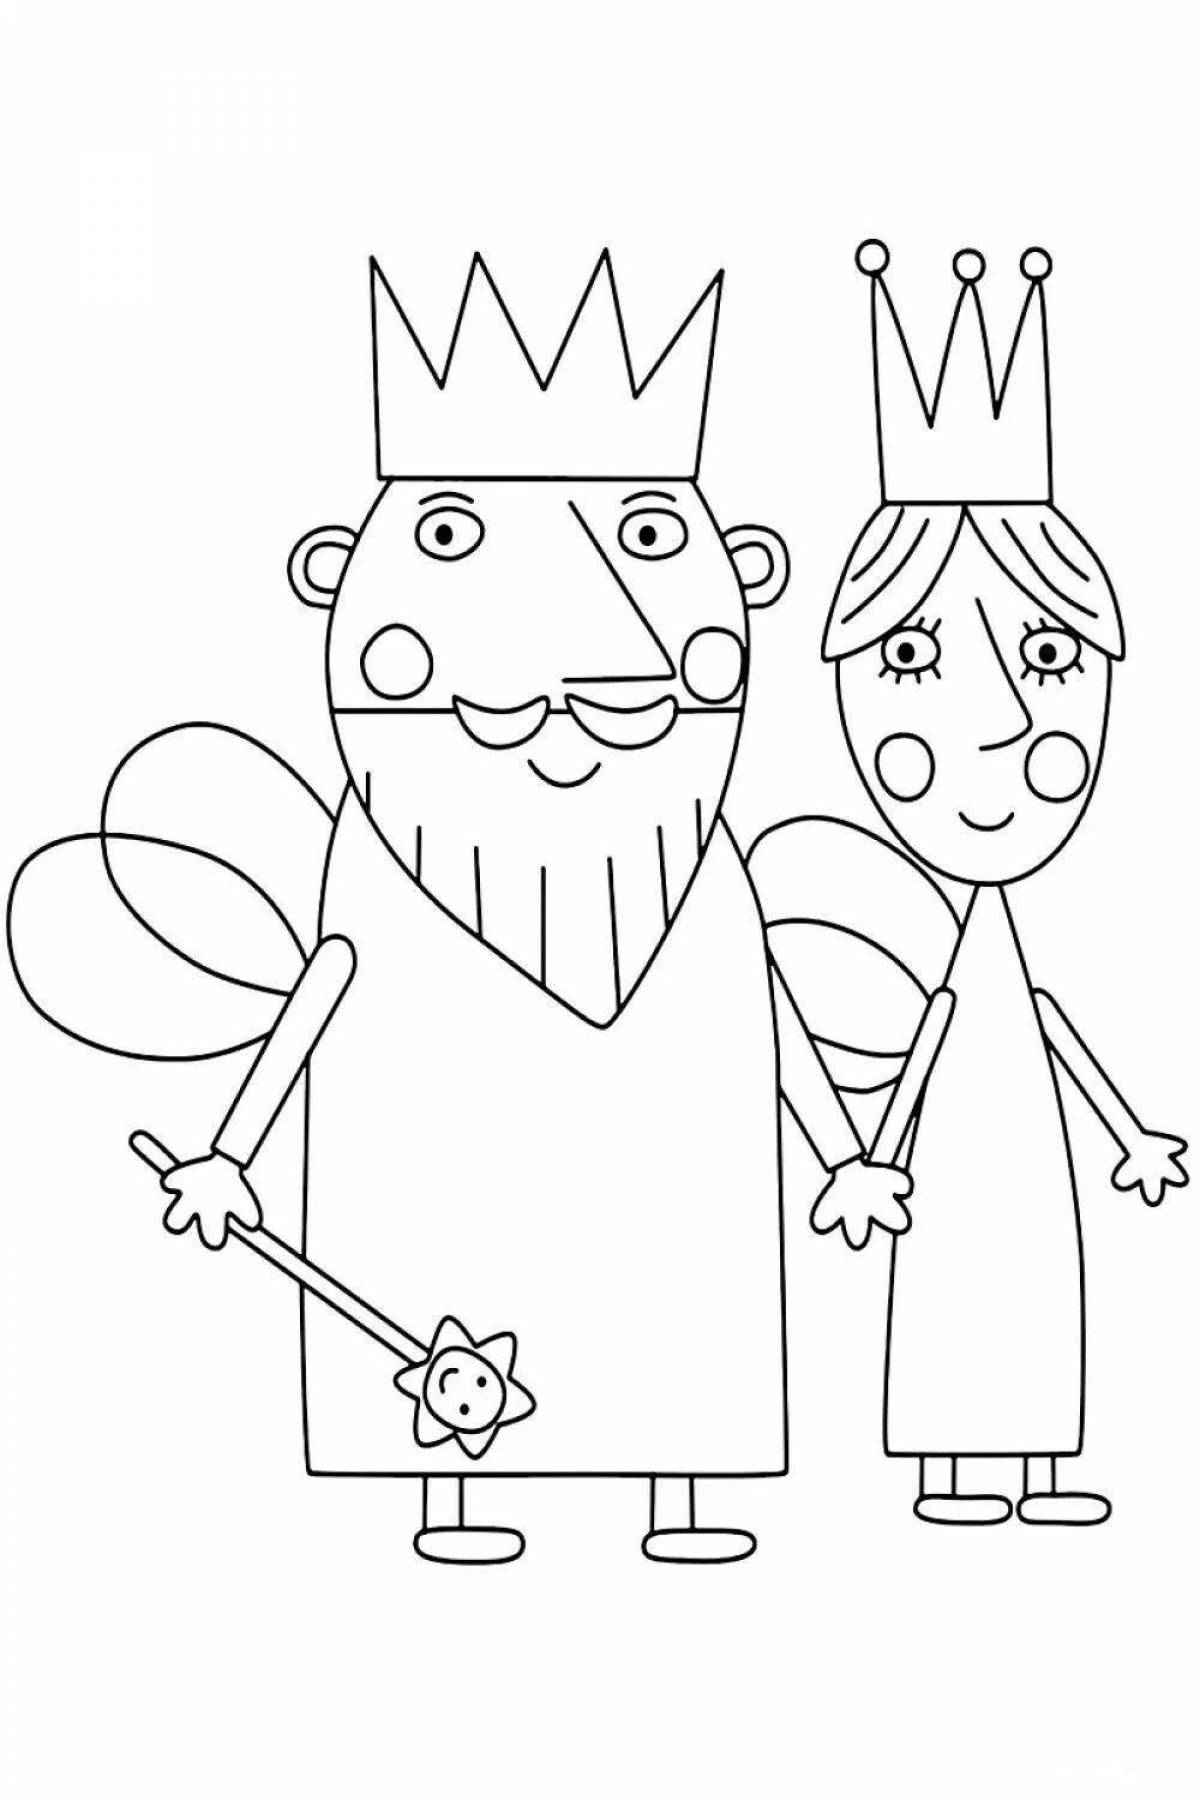 Ornate king coloring pages for kids